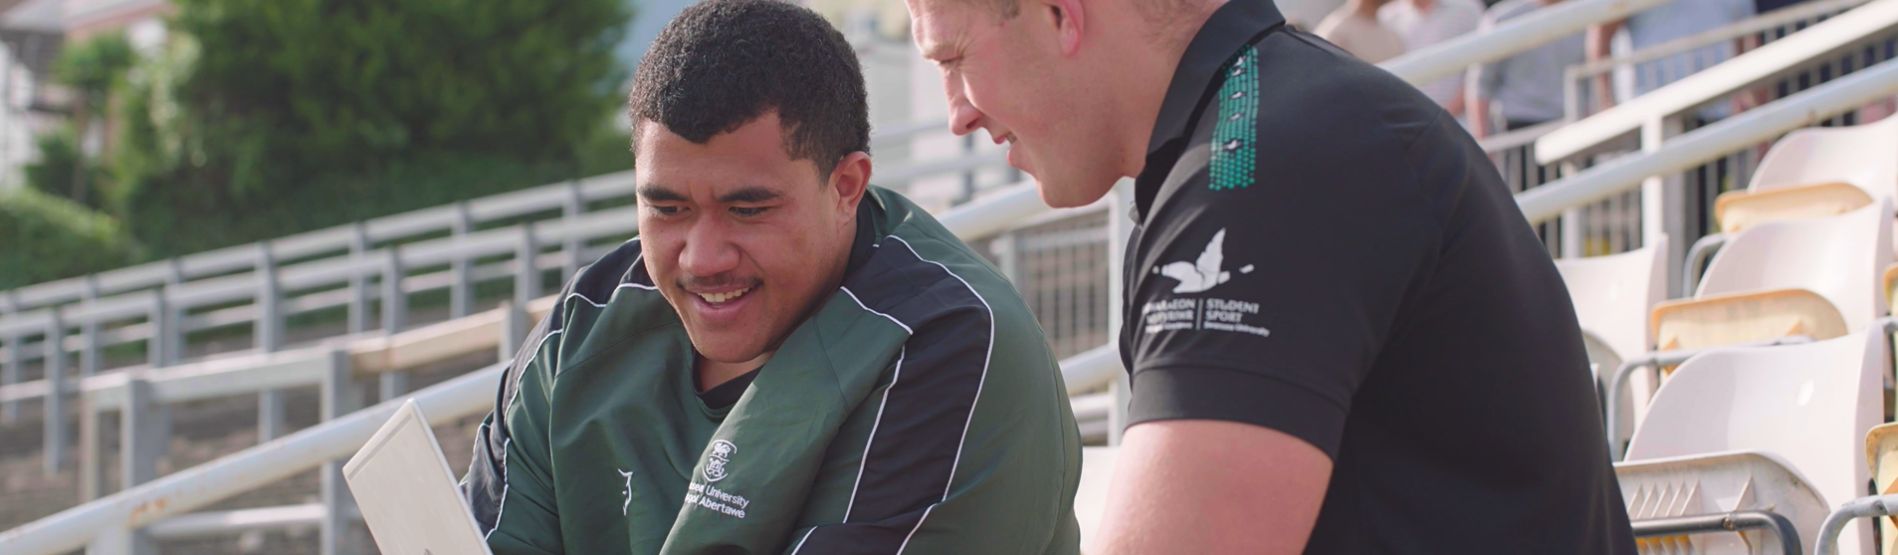 Athlete Support Officer Lloyd Ashley from Swansea University chatting to a high performance rugby scholar